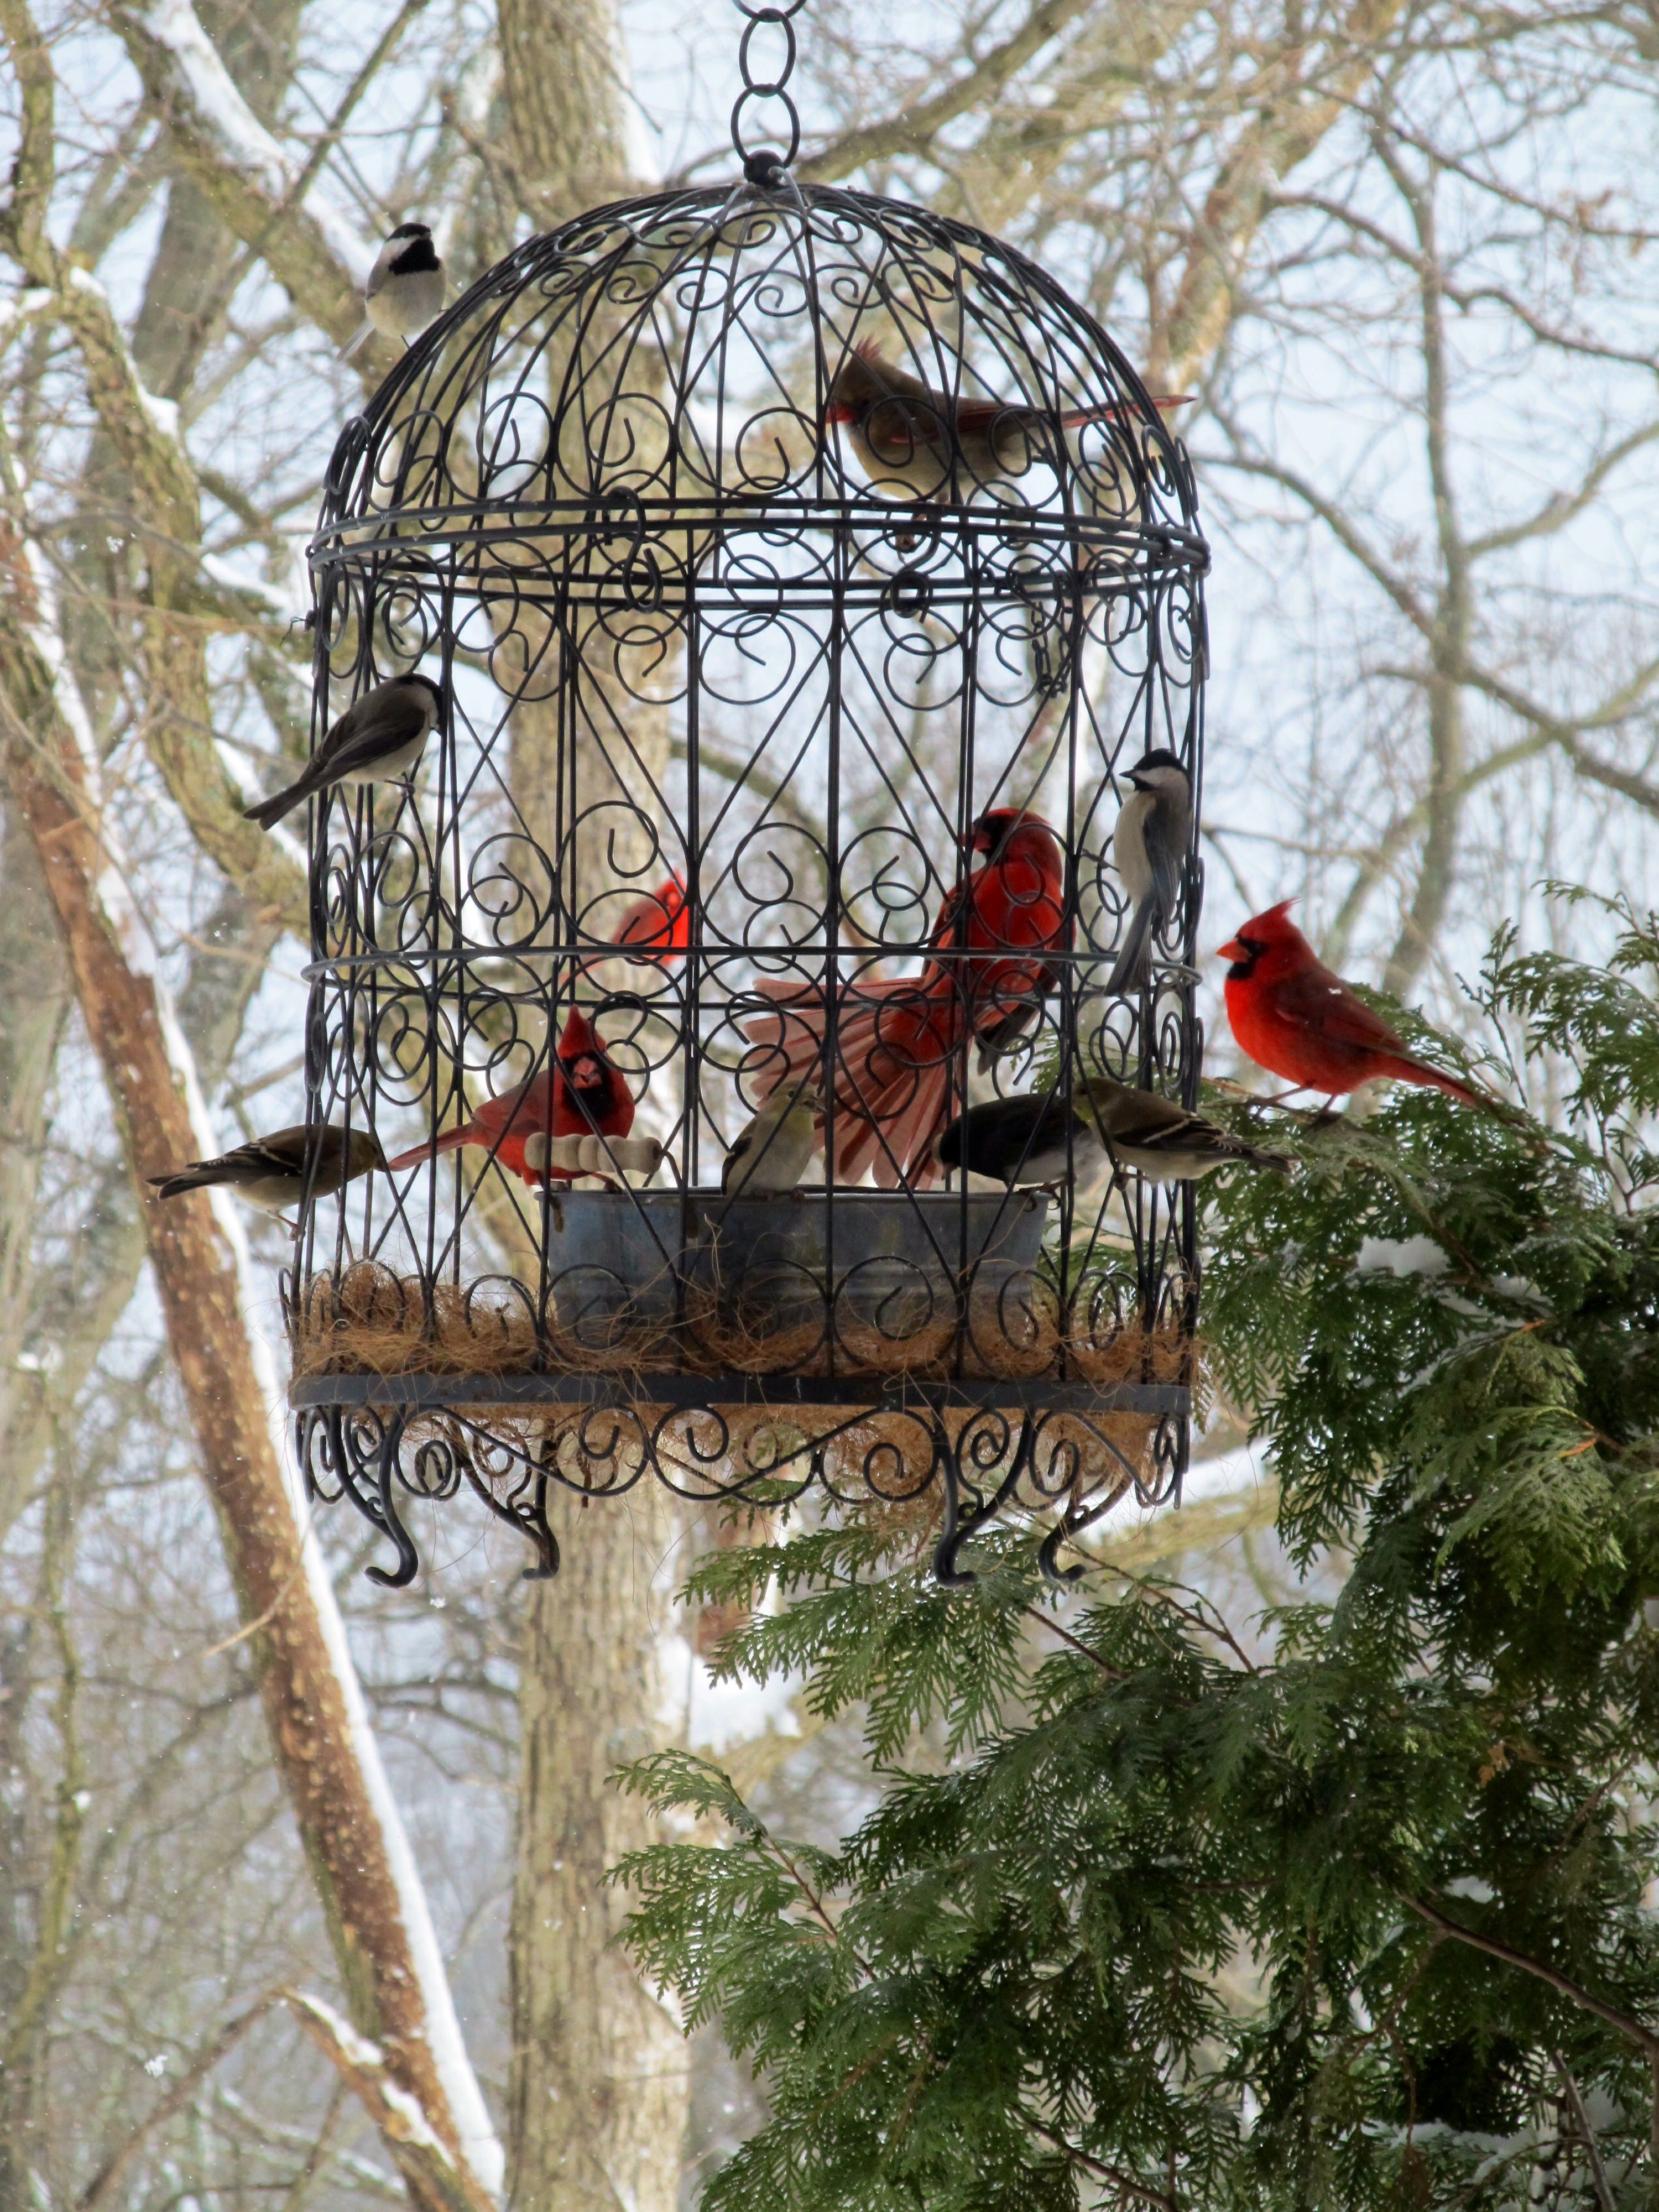 Love our beautiful cardinals! What a beautiful bird feeding station ...